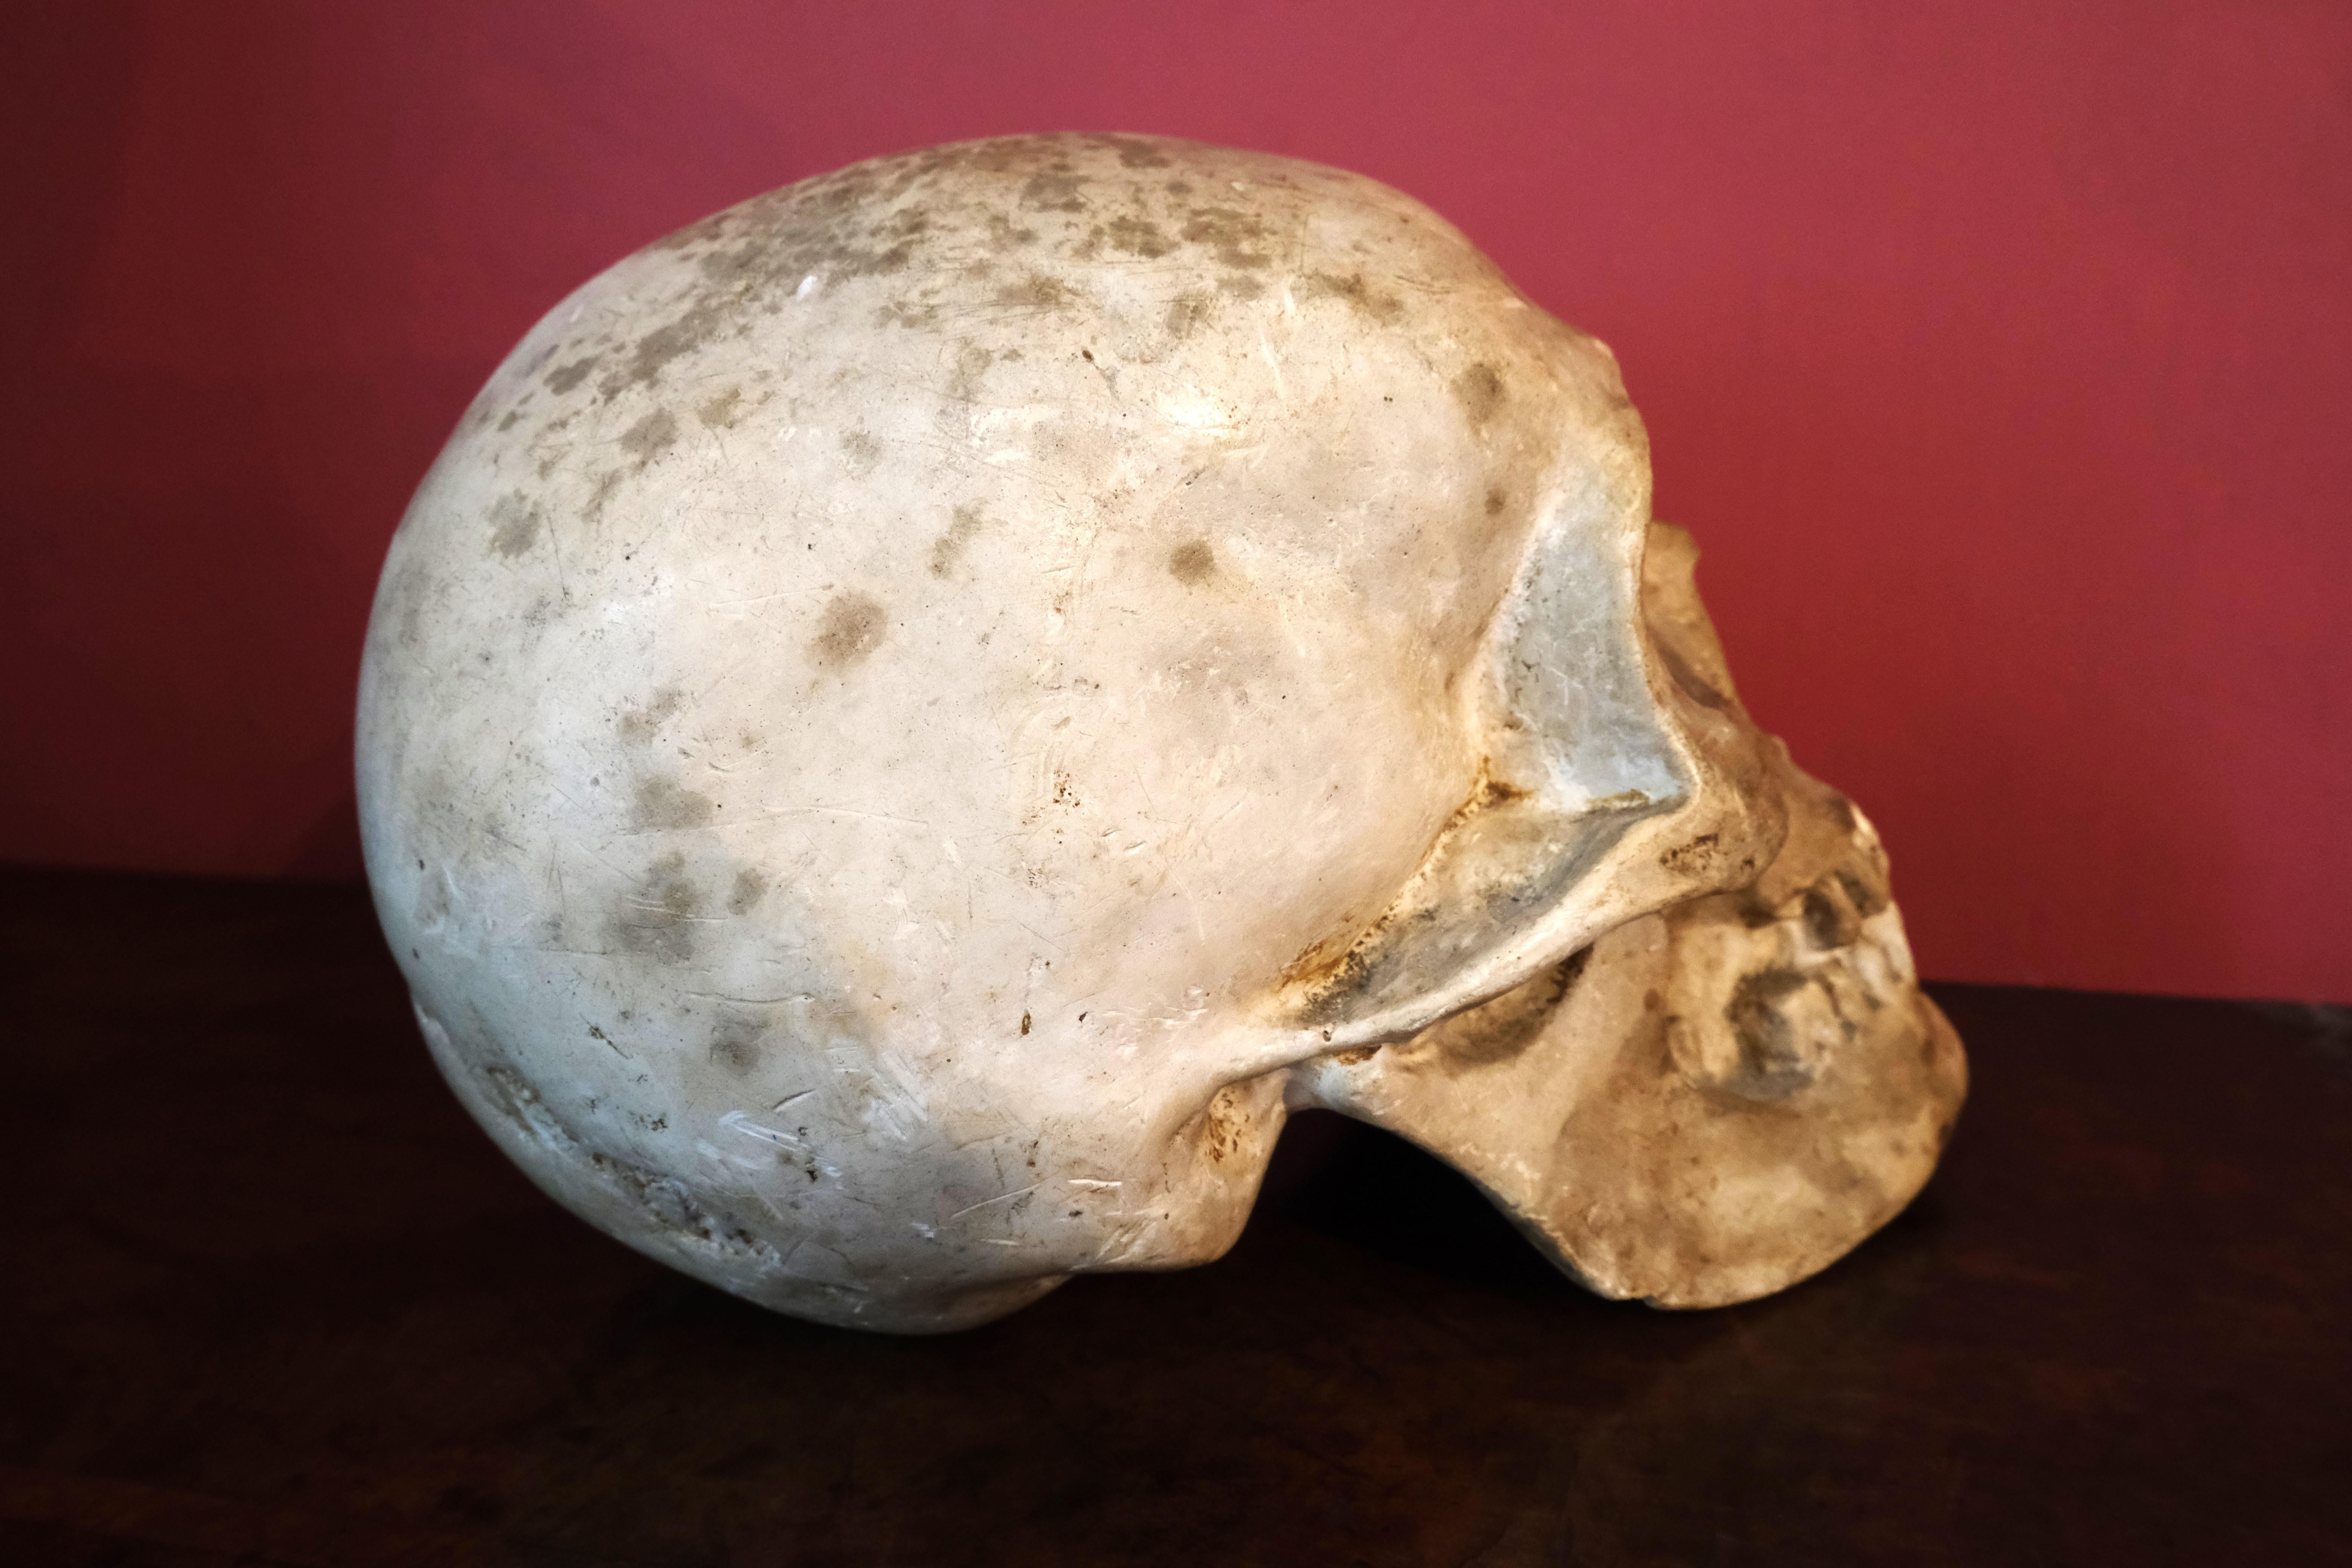 Hutton-Clarke Antiques is proud to present this extraordinary 19th-century Plaster of Paris skull, a rare and unusual find for connoisseurs of historical artifacts. Masterfully sculpted to emulate the intricate details of a real human skull, this